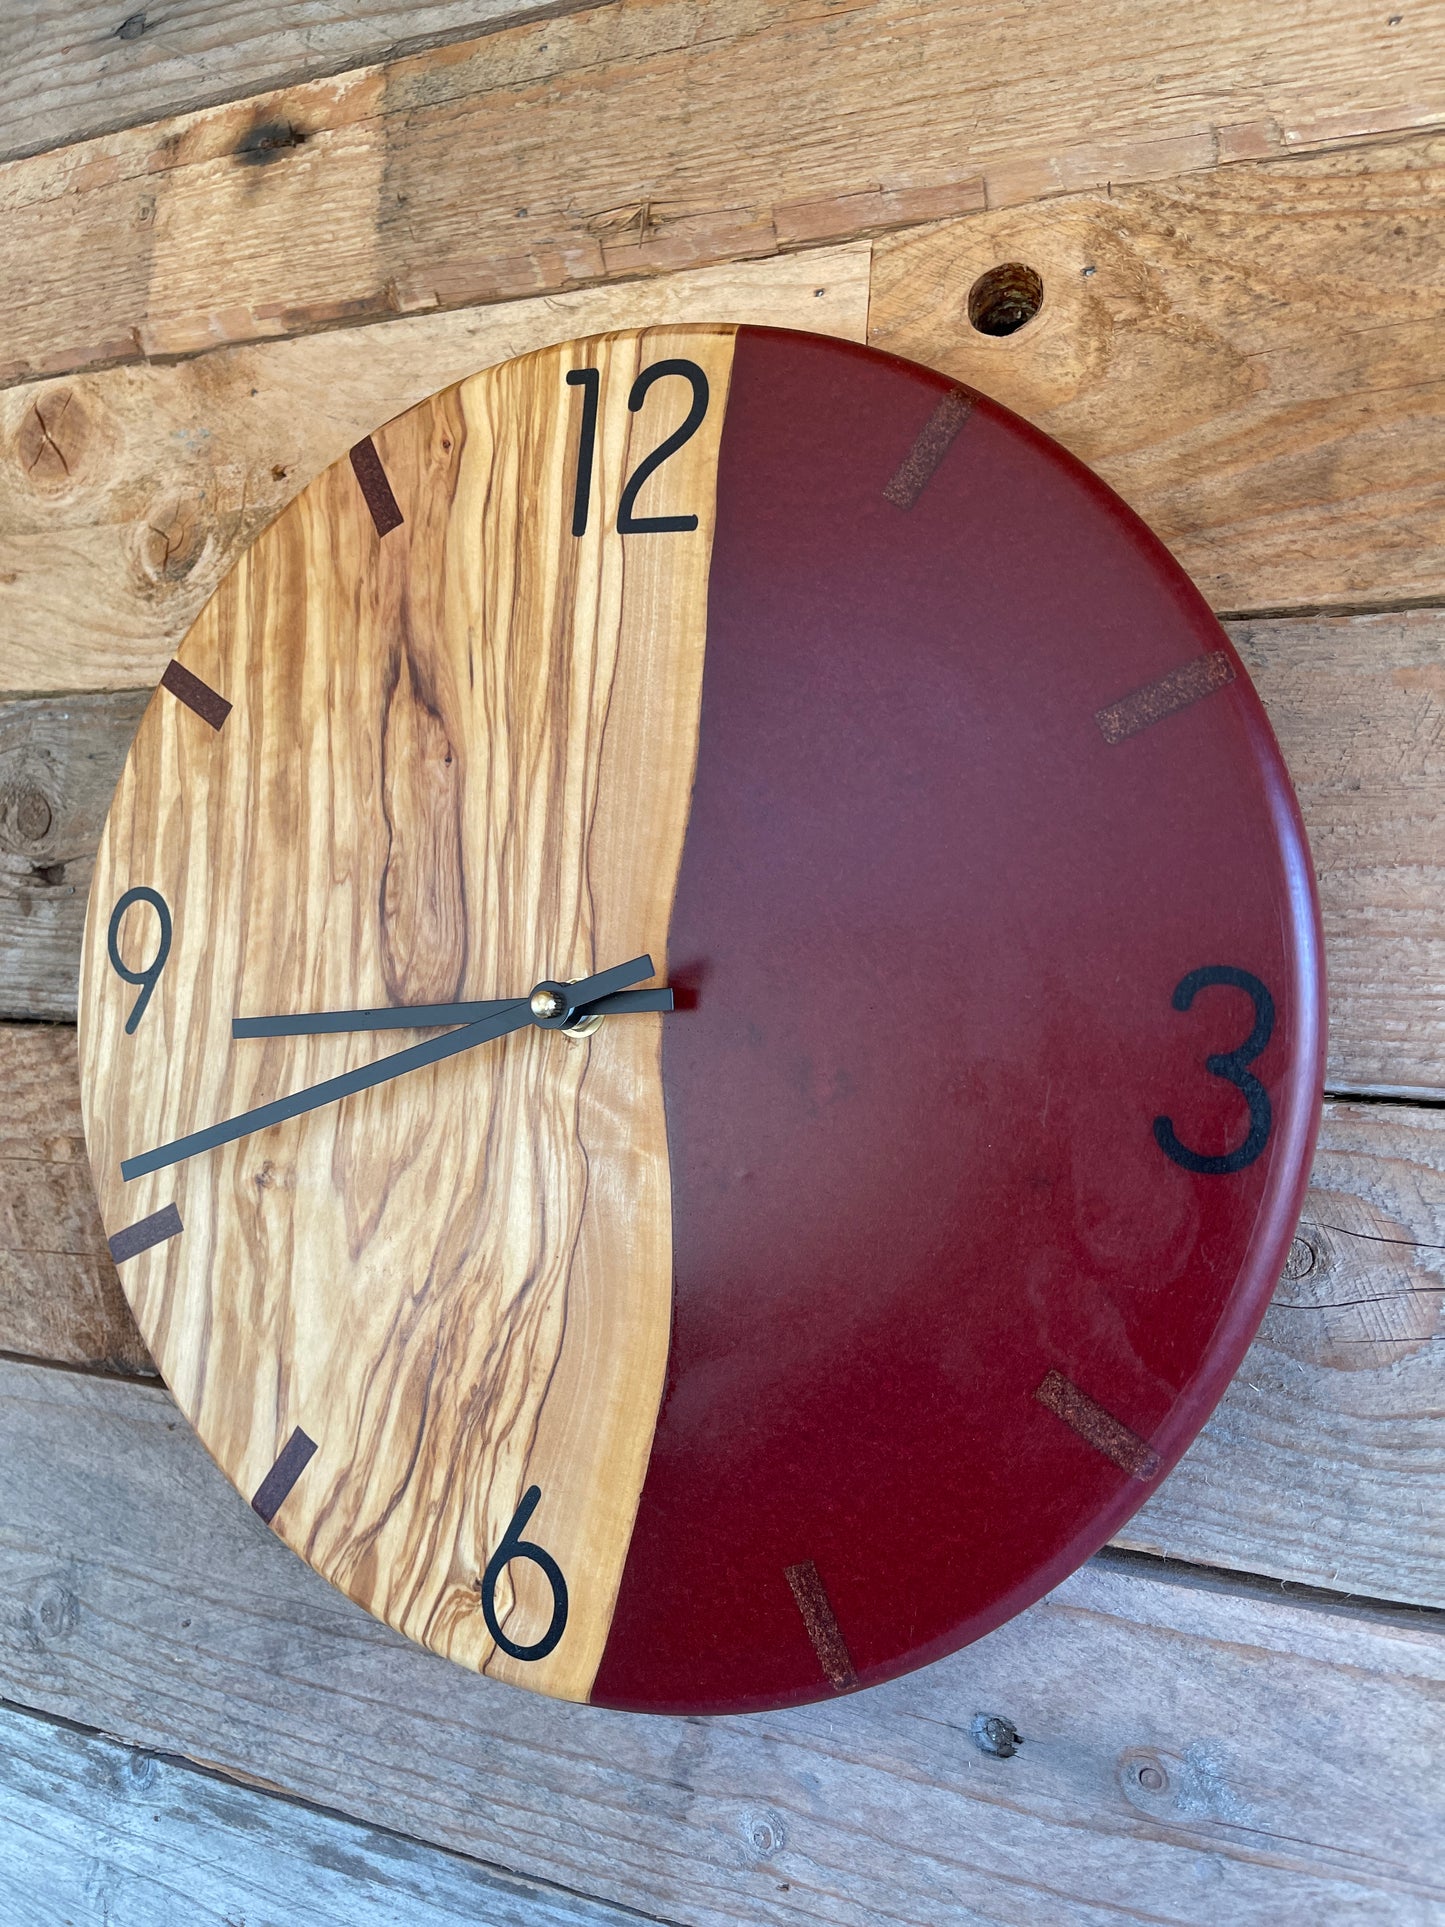 Olive wood and red resin 12" clock